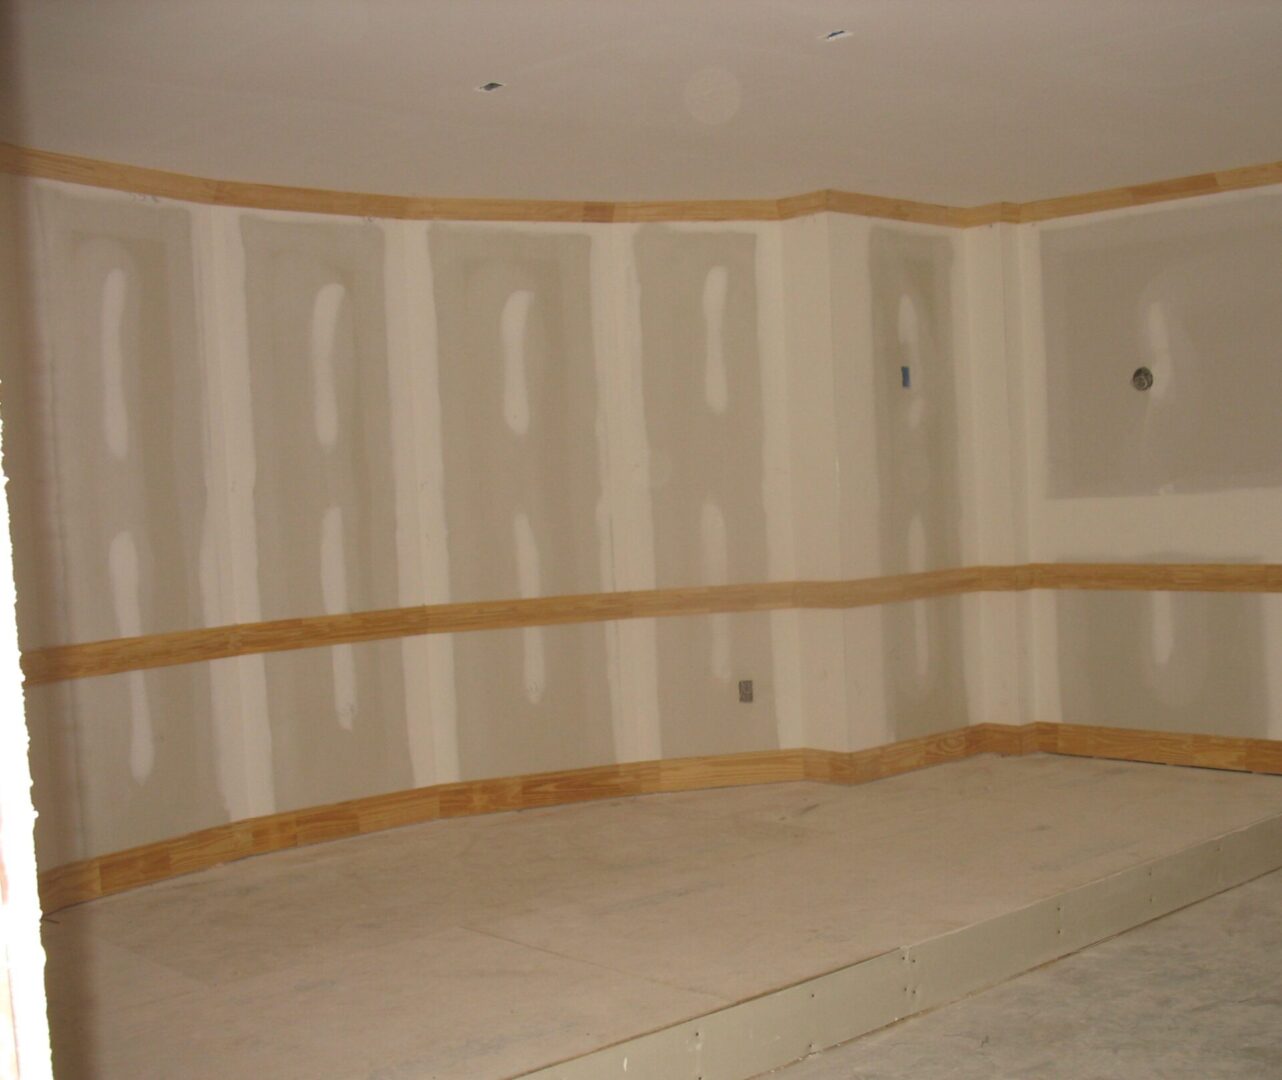 A room with walls being painted white and yellow.